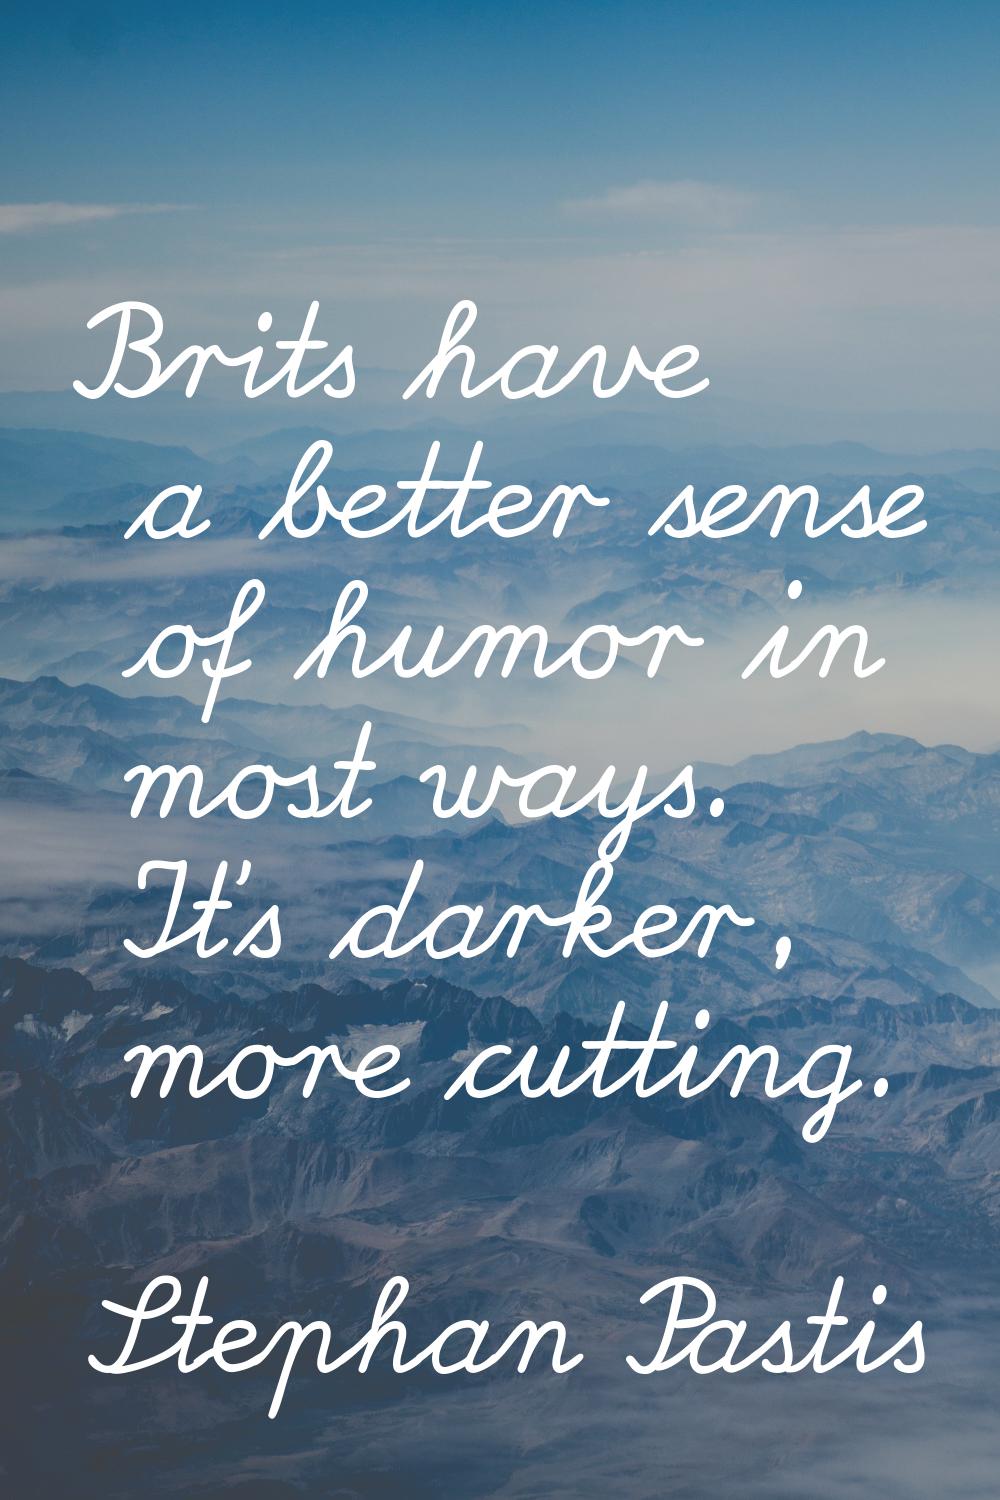 Brits have a better sense of humor in most ways. It's darker, more cutting.